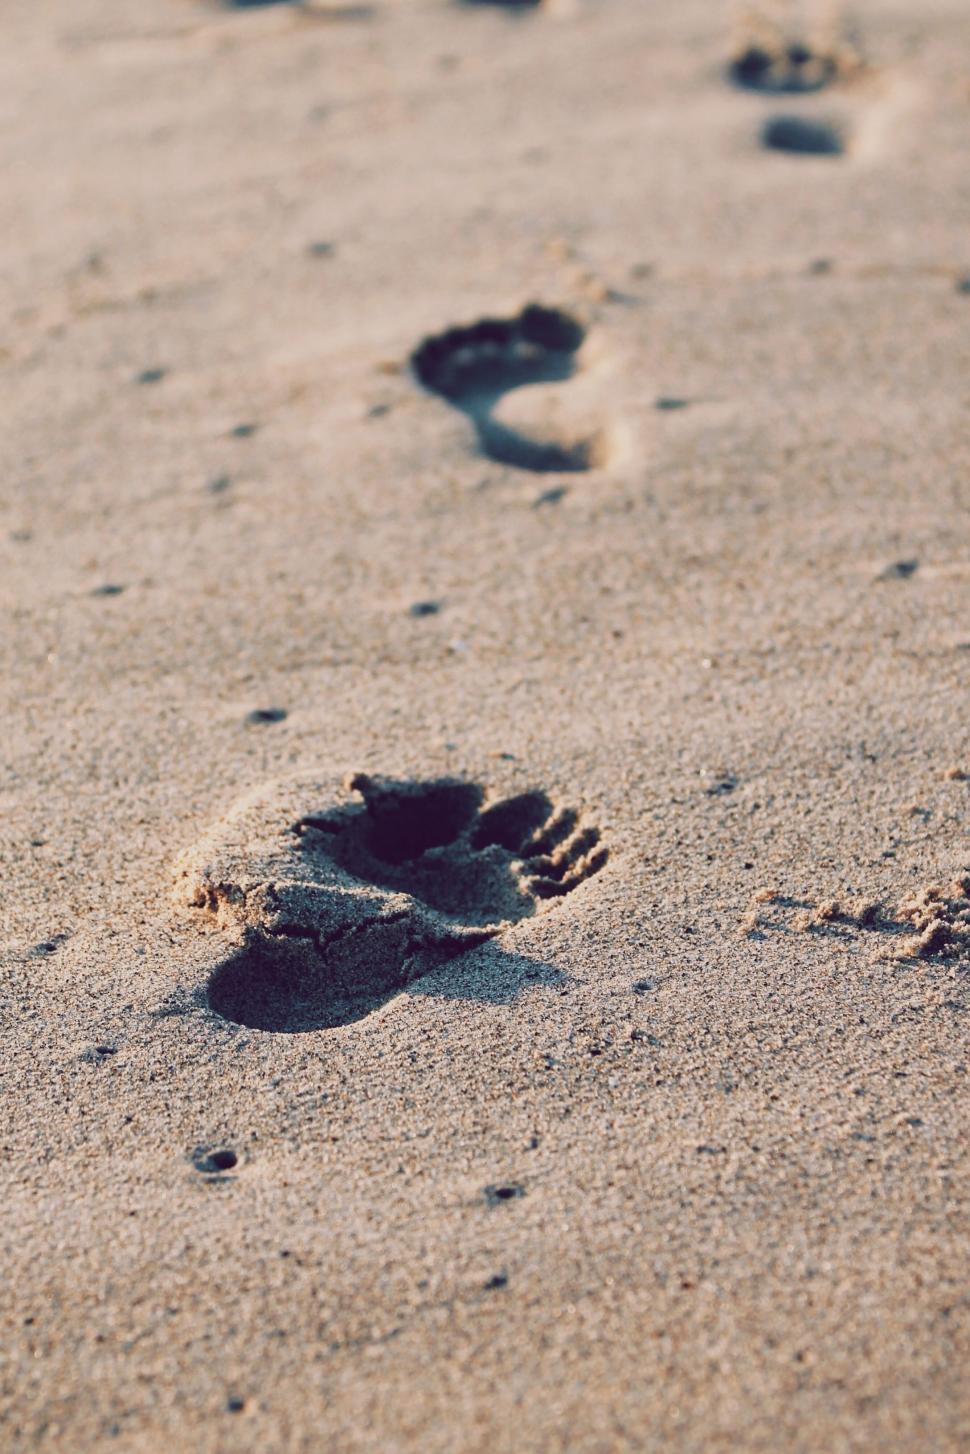 Free Image of Dog Paw Prints in the Sand on a Beach 